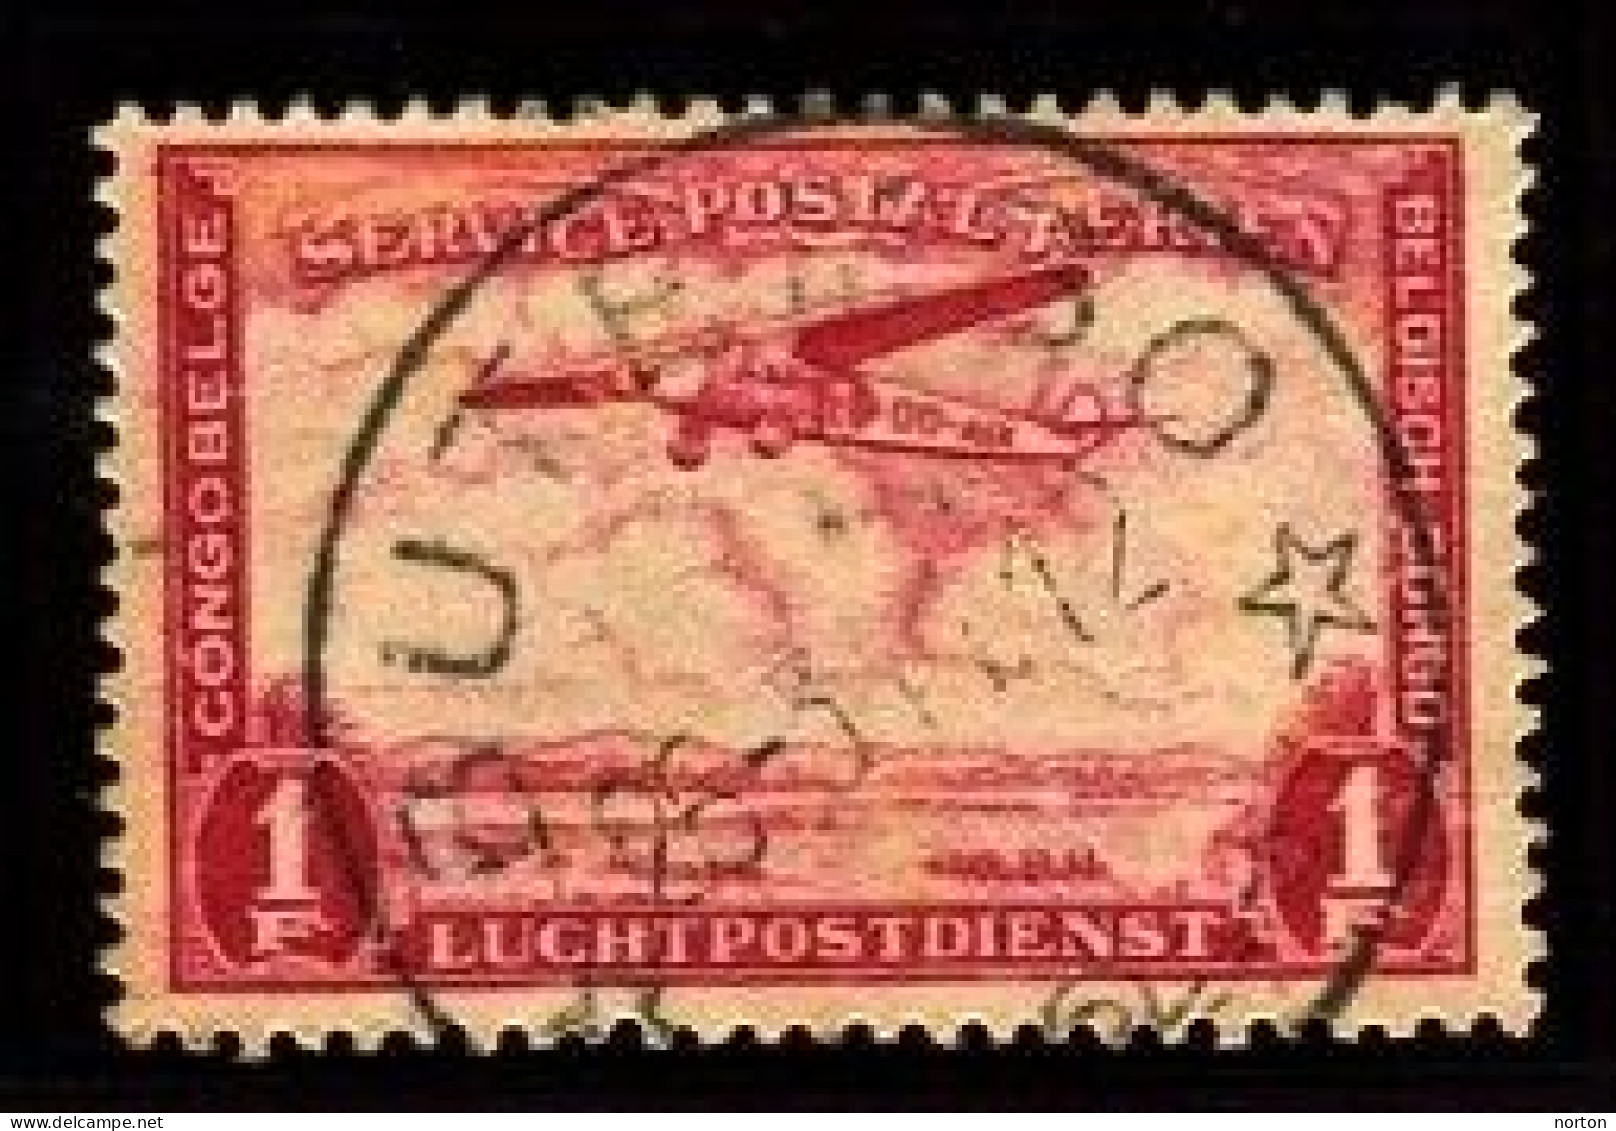 Congo Butembo Oblit. Keach 8A1 Sur C.O.B. PA8 Le 26/03/1941 - Used Stamps